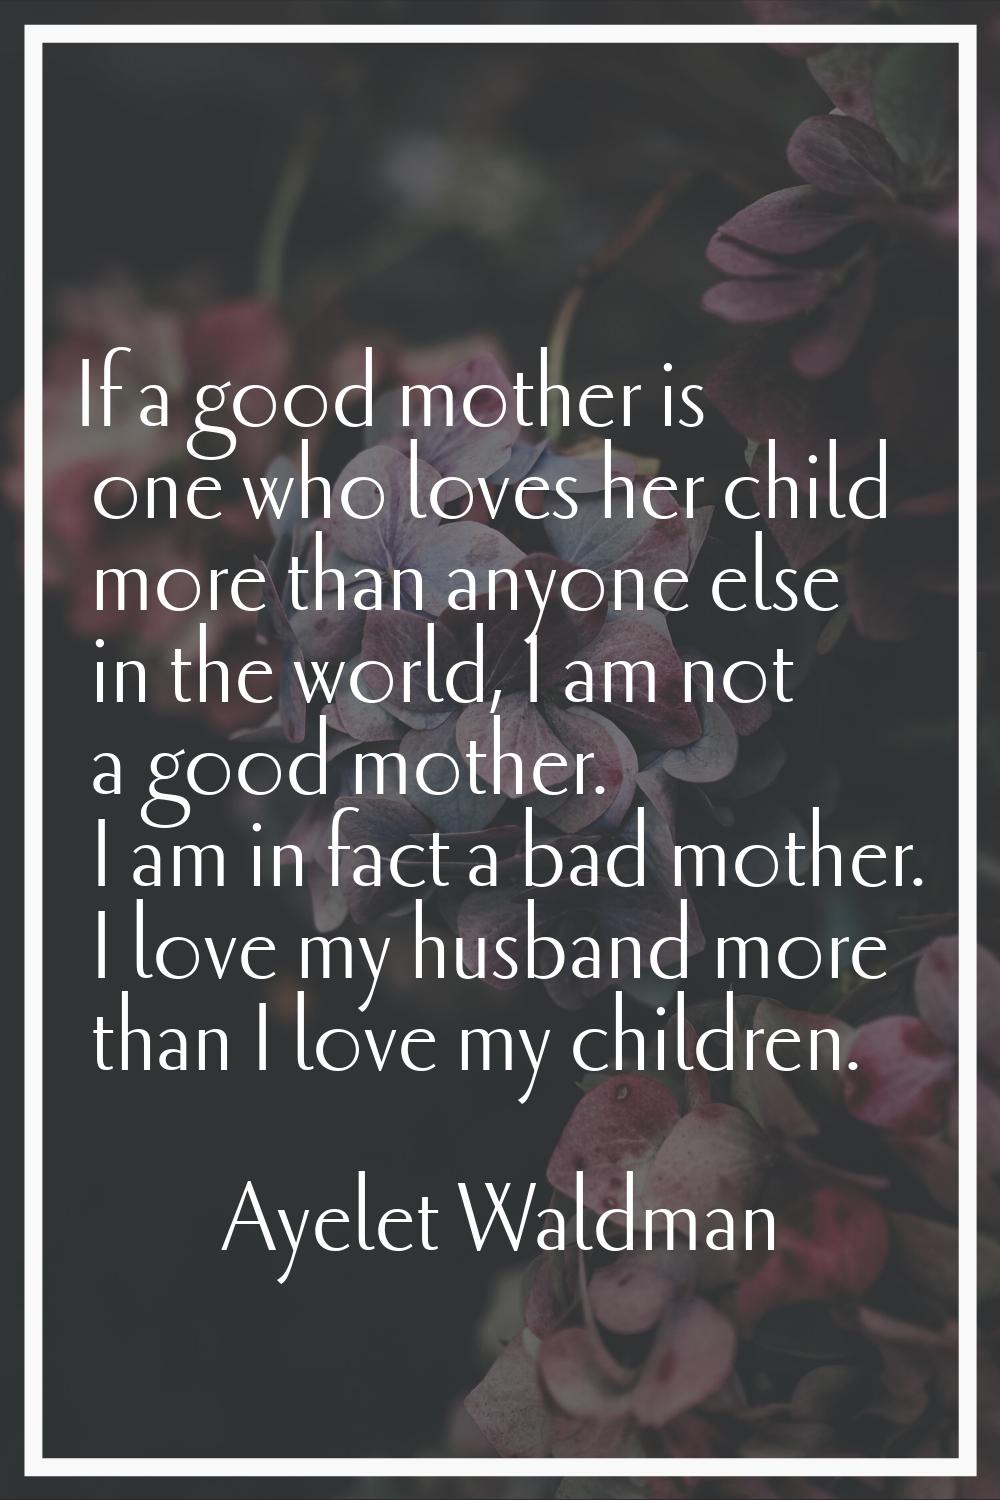 If a good mother is one who loves her child more than anyone else in the world, I am not a good mot